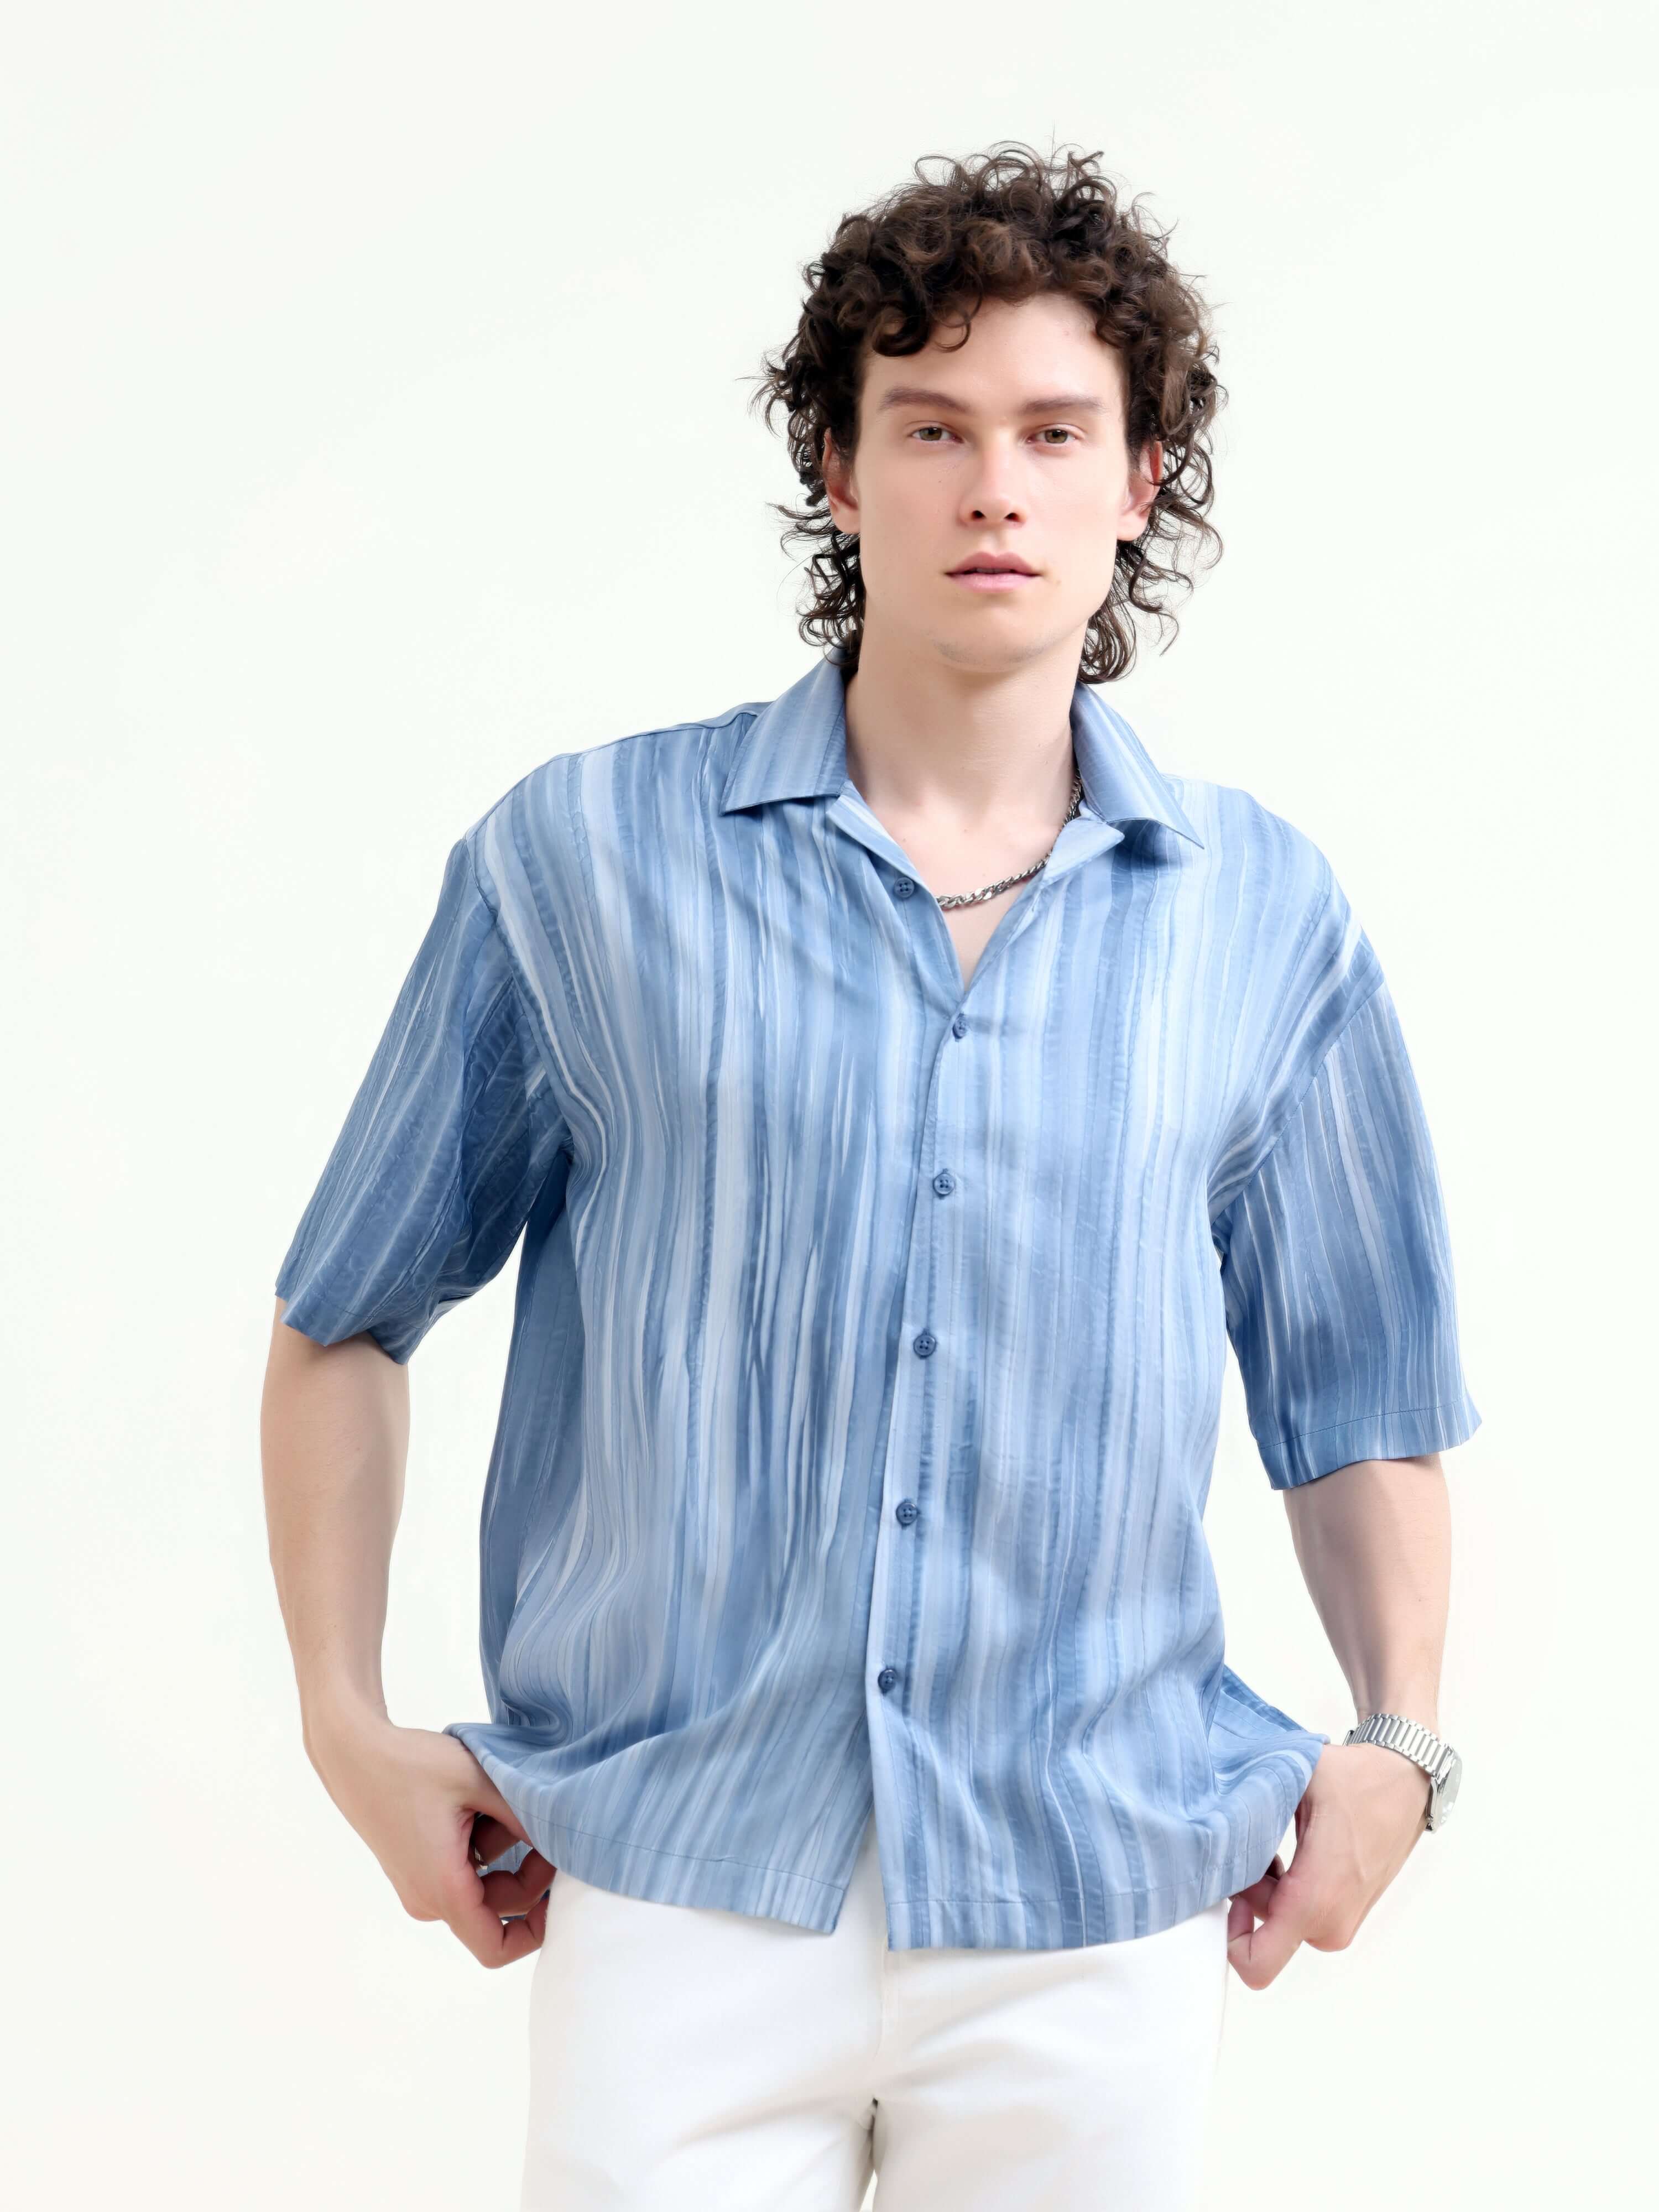 Men's Pastel Blue Oversized Shirt - Summer Casual shop online at Estilocus. Shop new arrivals: Tonal pastel blue shirt for a relaxed summer style. Lightweight, oversized fit for ultimate comfort. Order yours today!